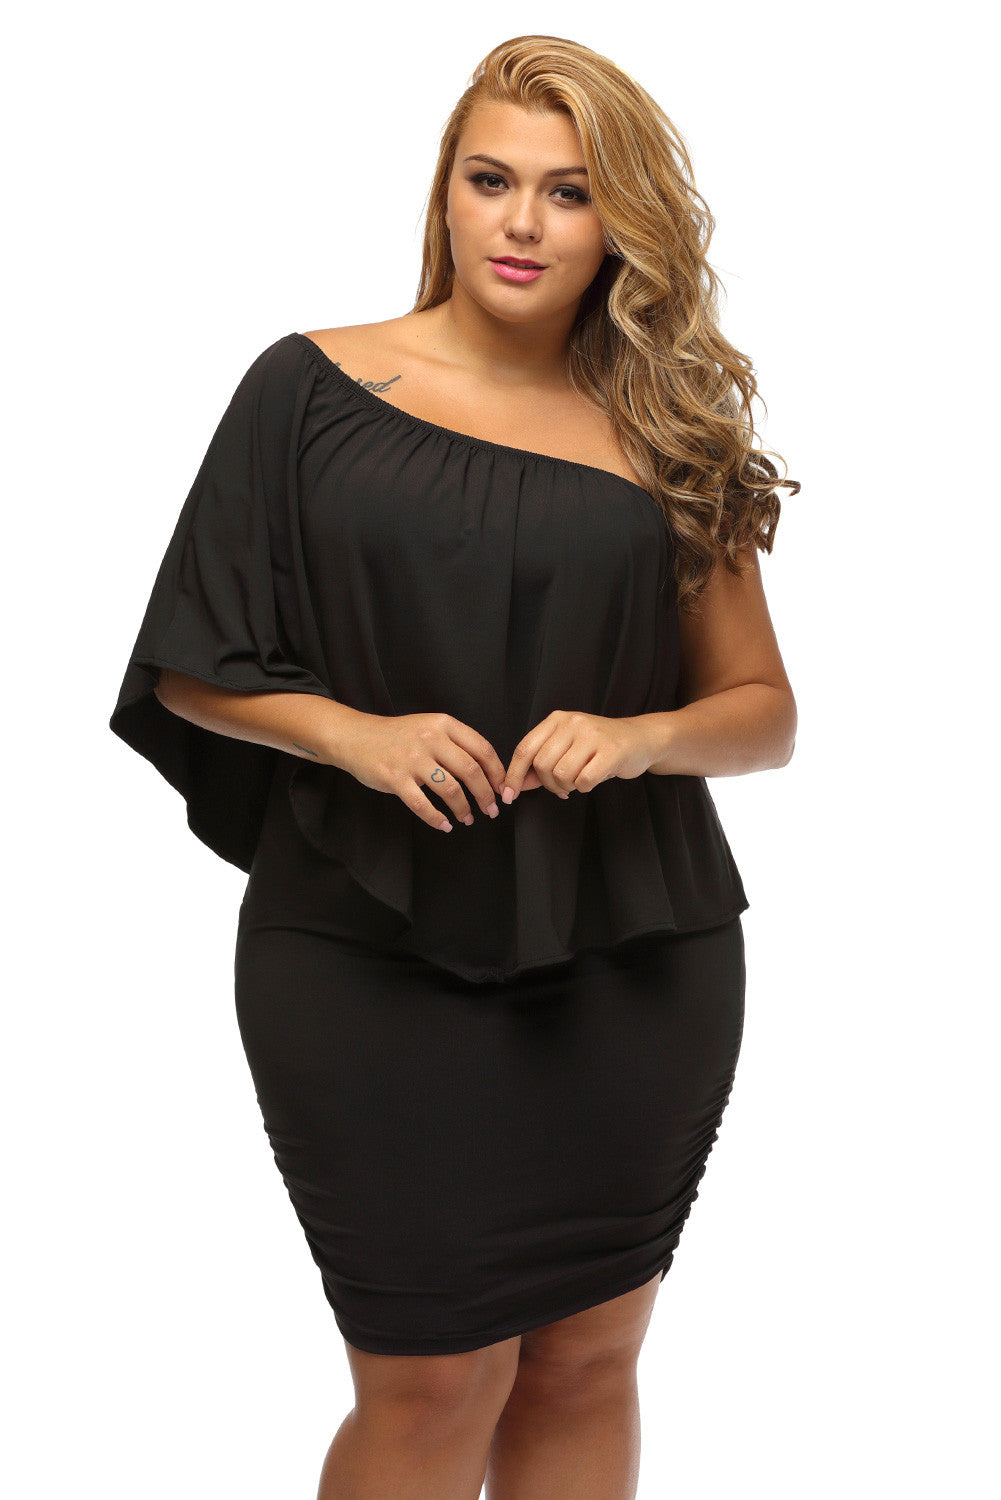 Robe Grande Taille Noire Court Collerette Epaules Denudees